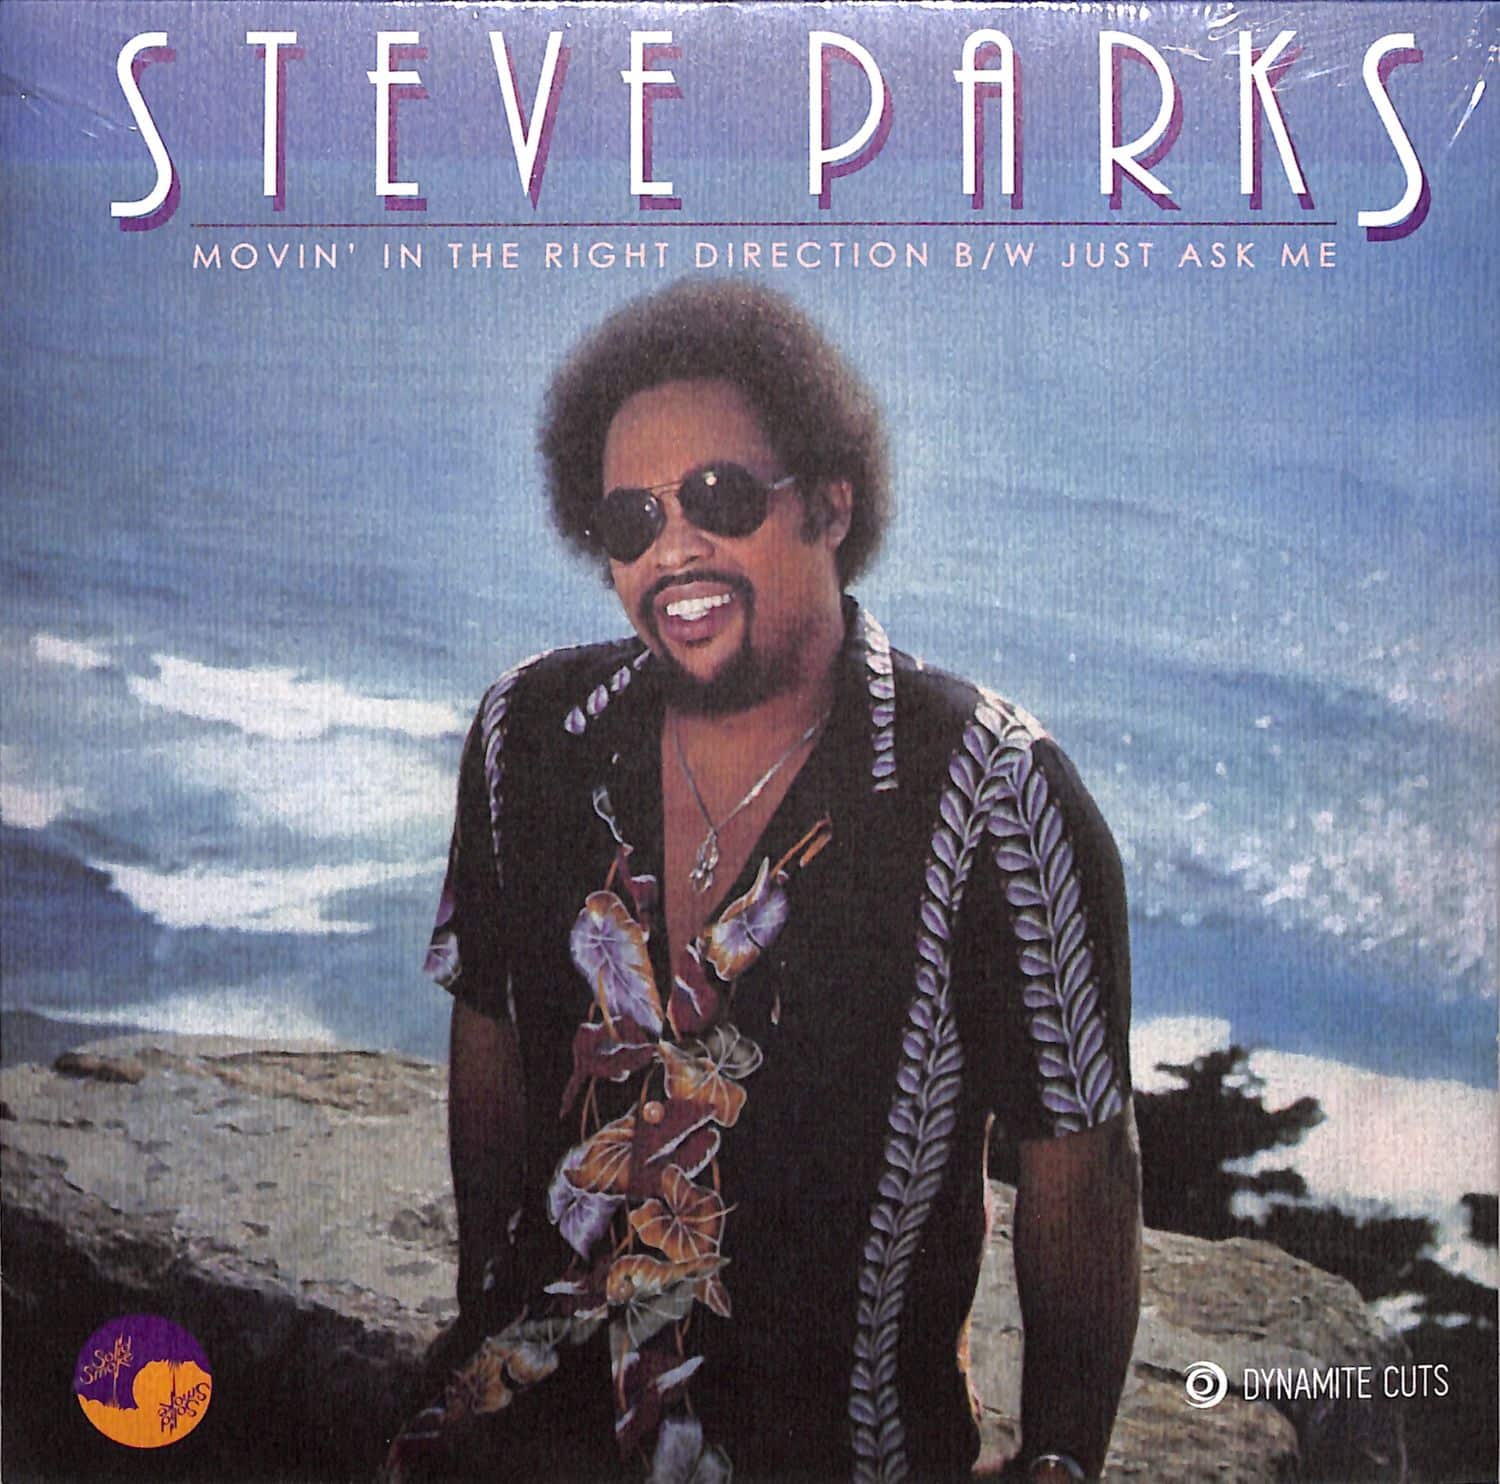 Steve Parks - MOVIN IN THE RIGHT DIRECTION / JUST ASK ME 